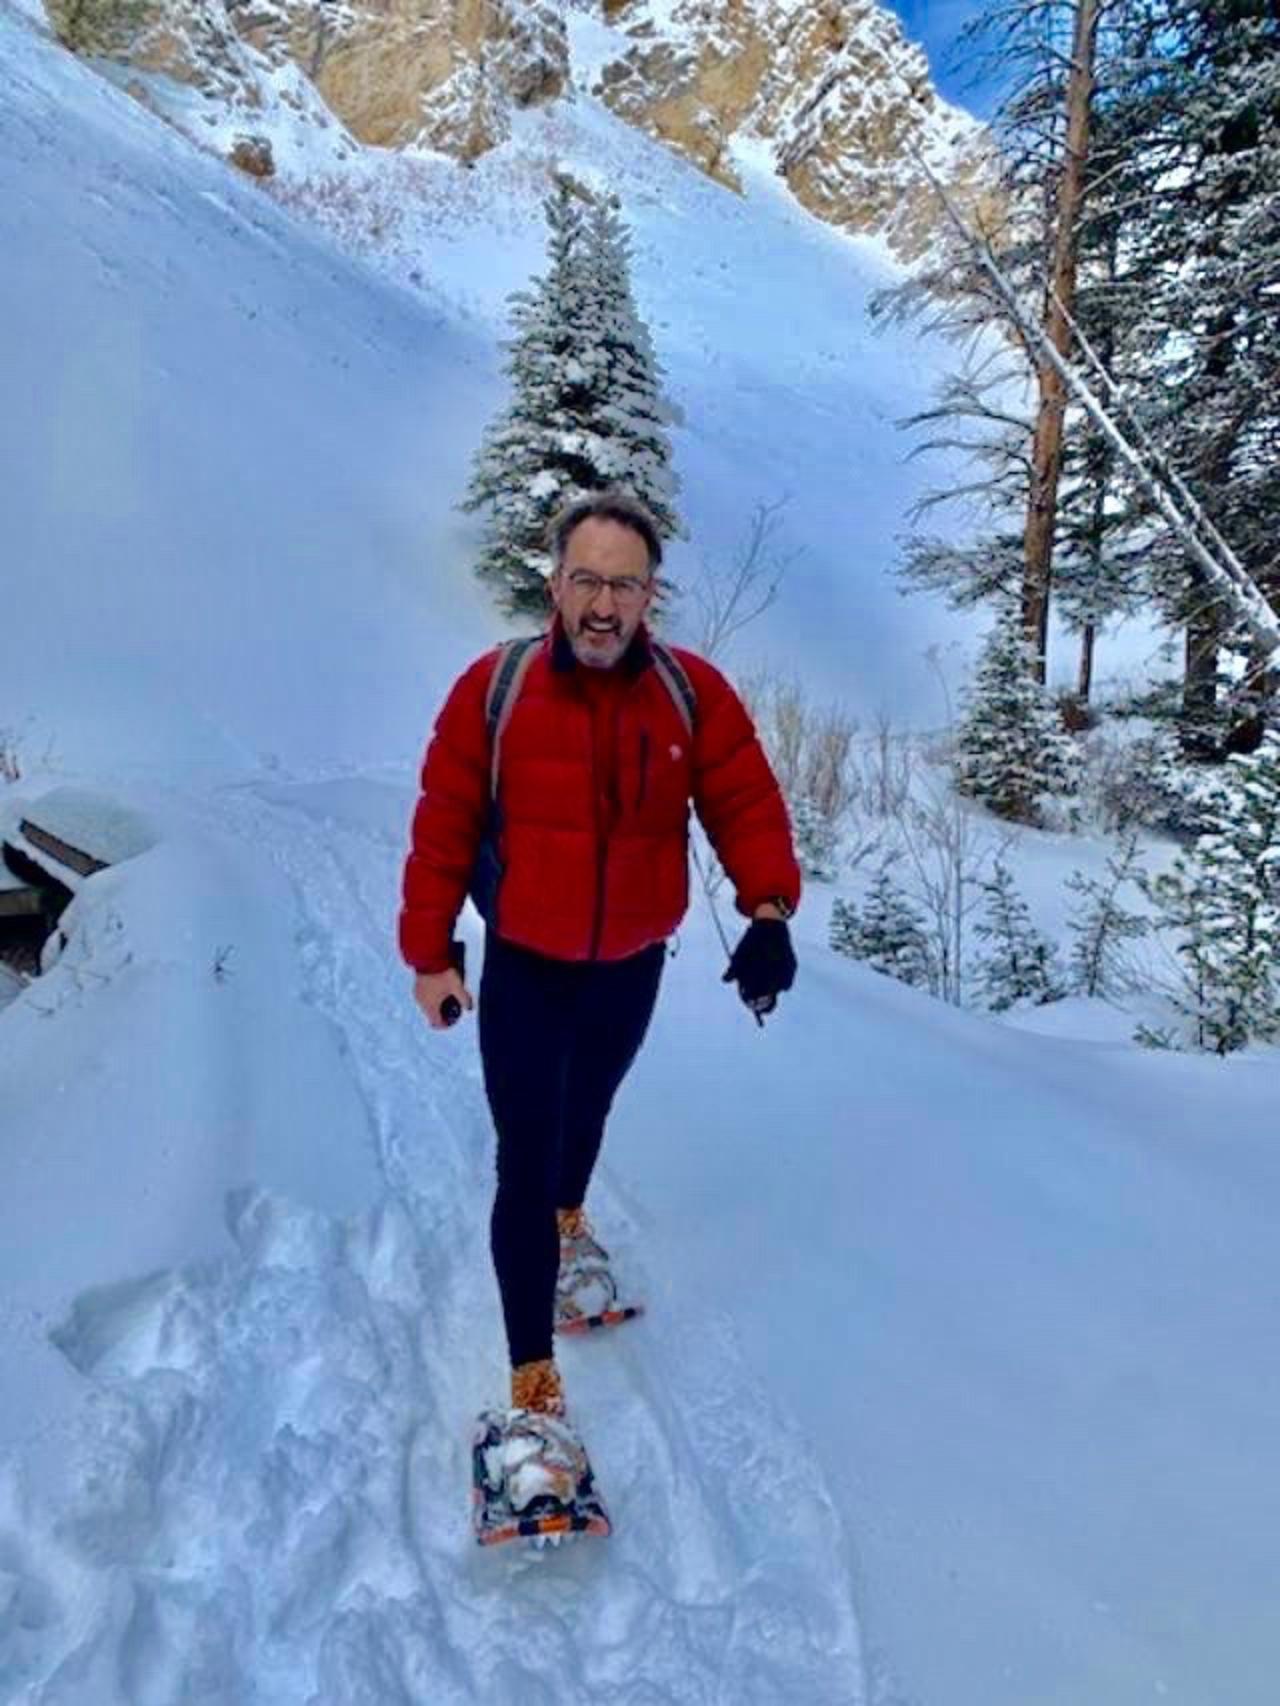 Writer Joe Scalia snowshoeing in Buffalo Horn Creek this winter. "If protecting the wildlife fullness here meant I could no longer snowshoe, I'd support that. Conservation is not about my enjoyment. It's about a higher good." Photo courtesy Joe Scalia